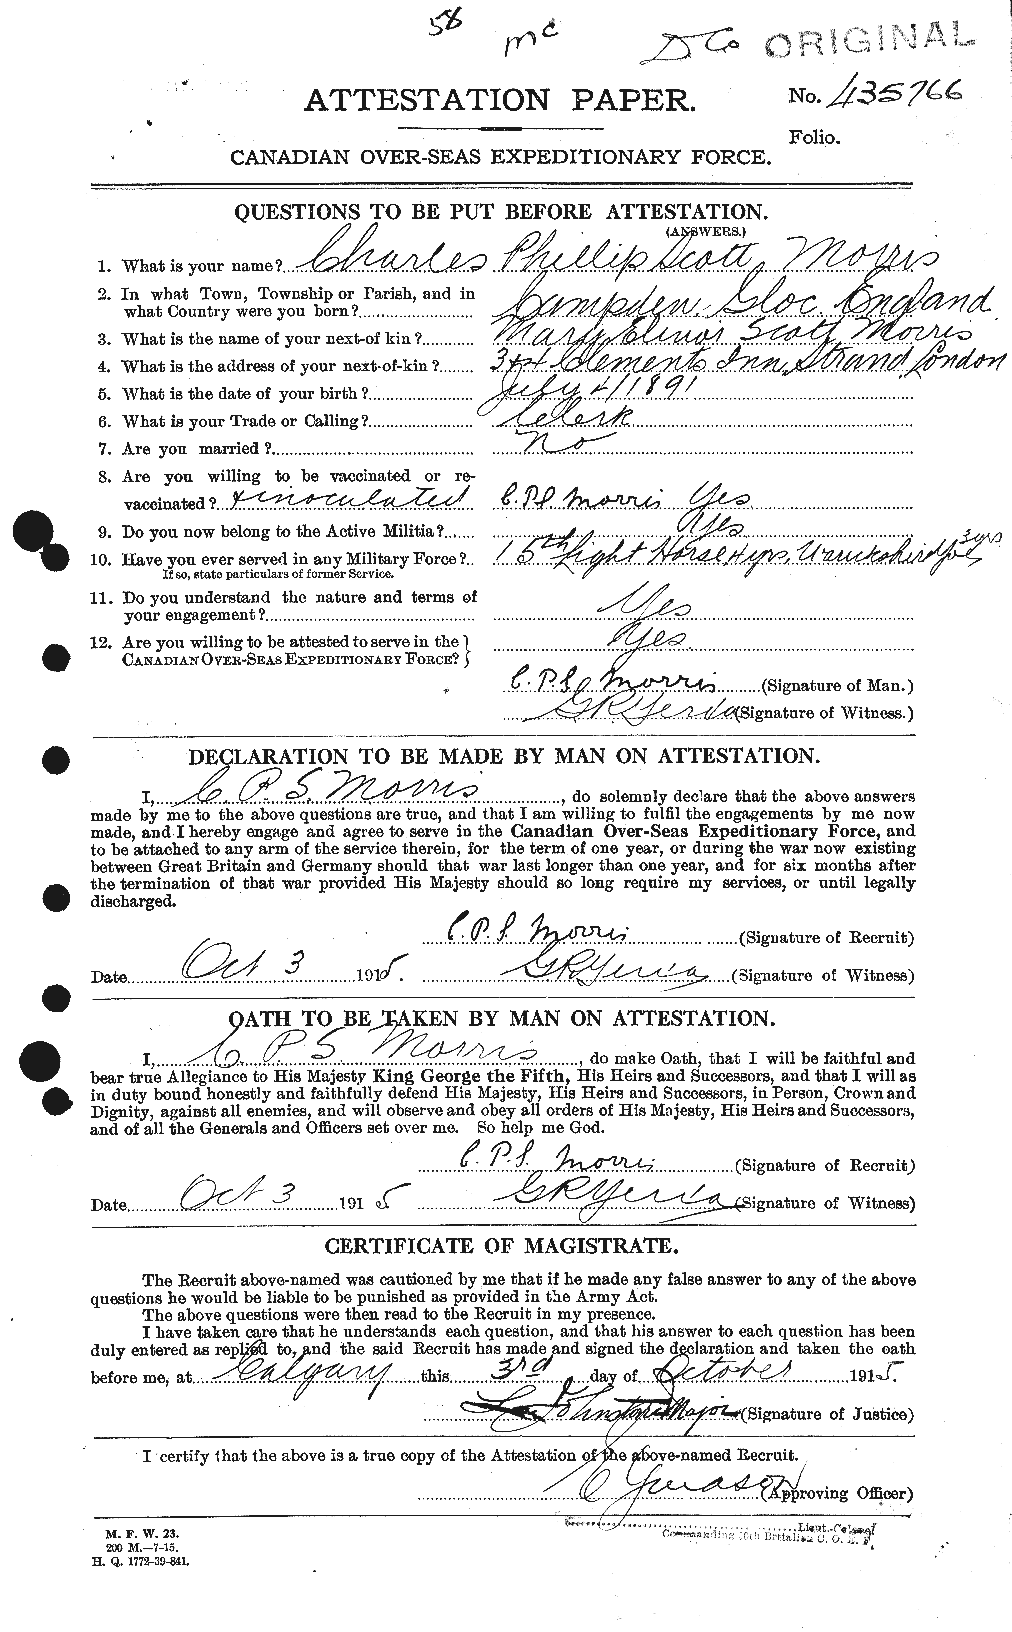 Personnel Records of the First World War - CEF 506059a